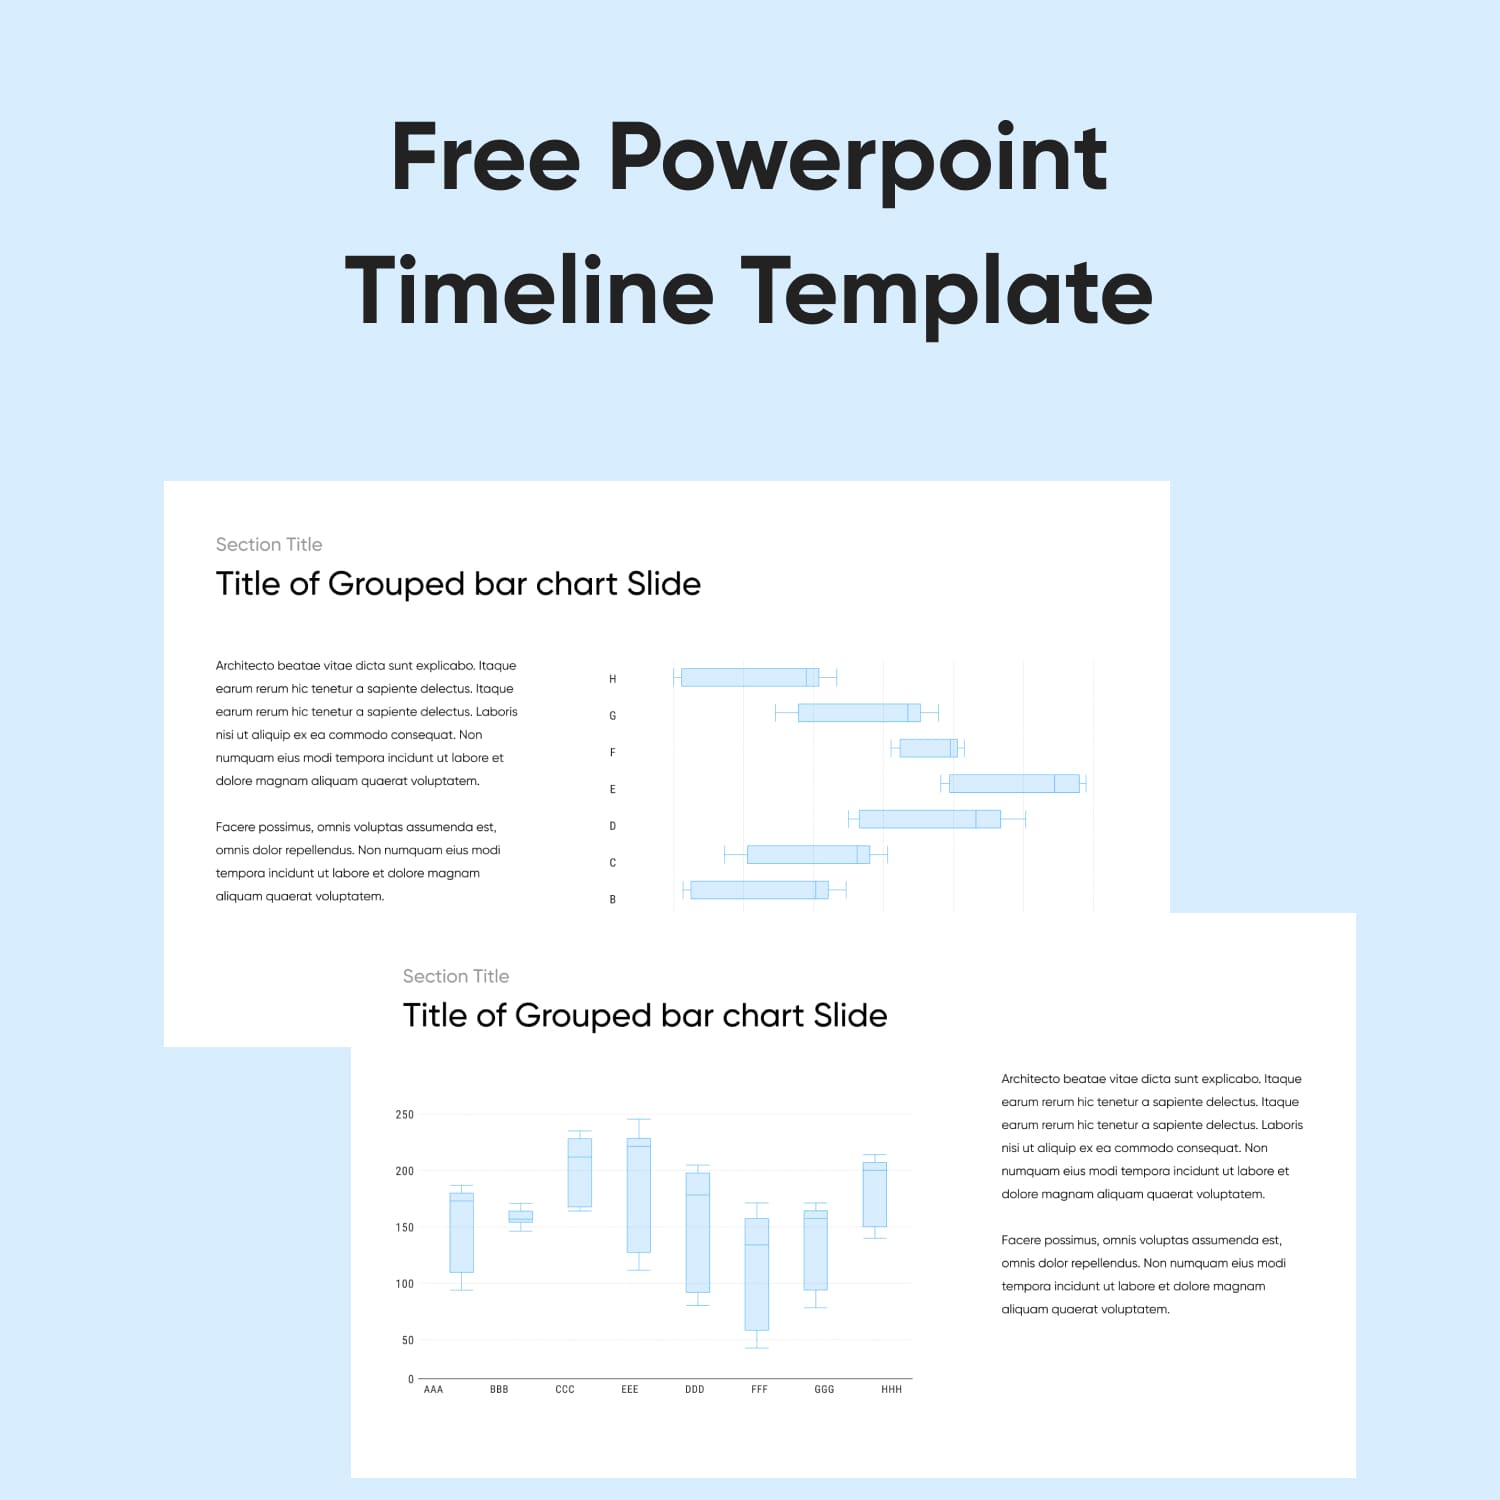 11 Free Powerpoint Timeline Template 1500x1500 4 